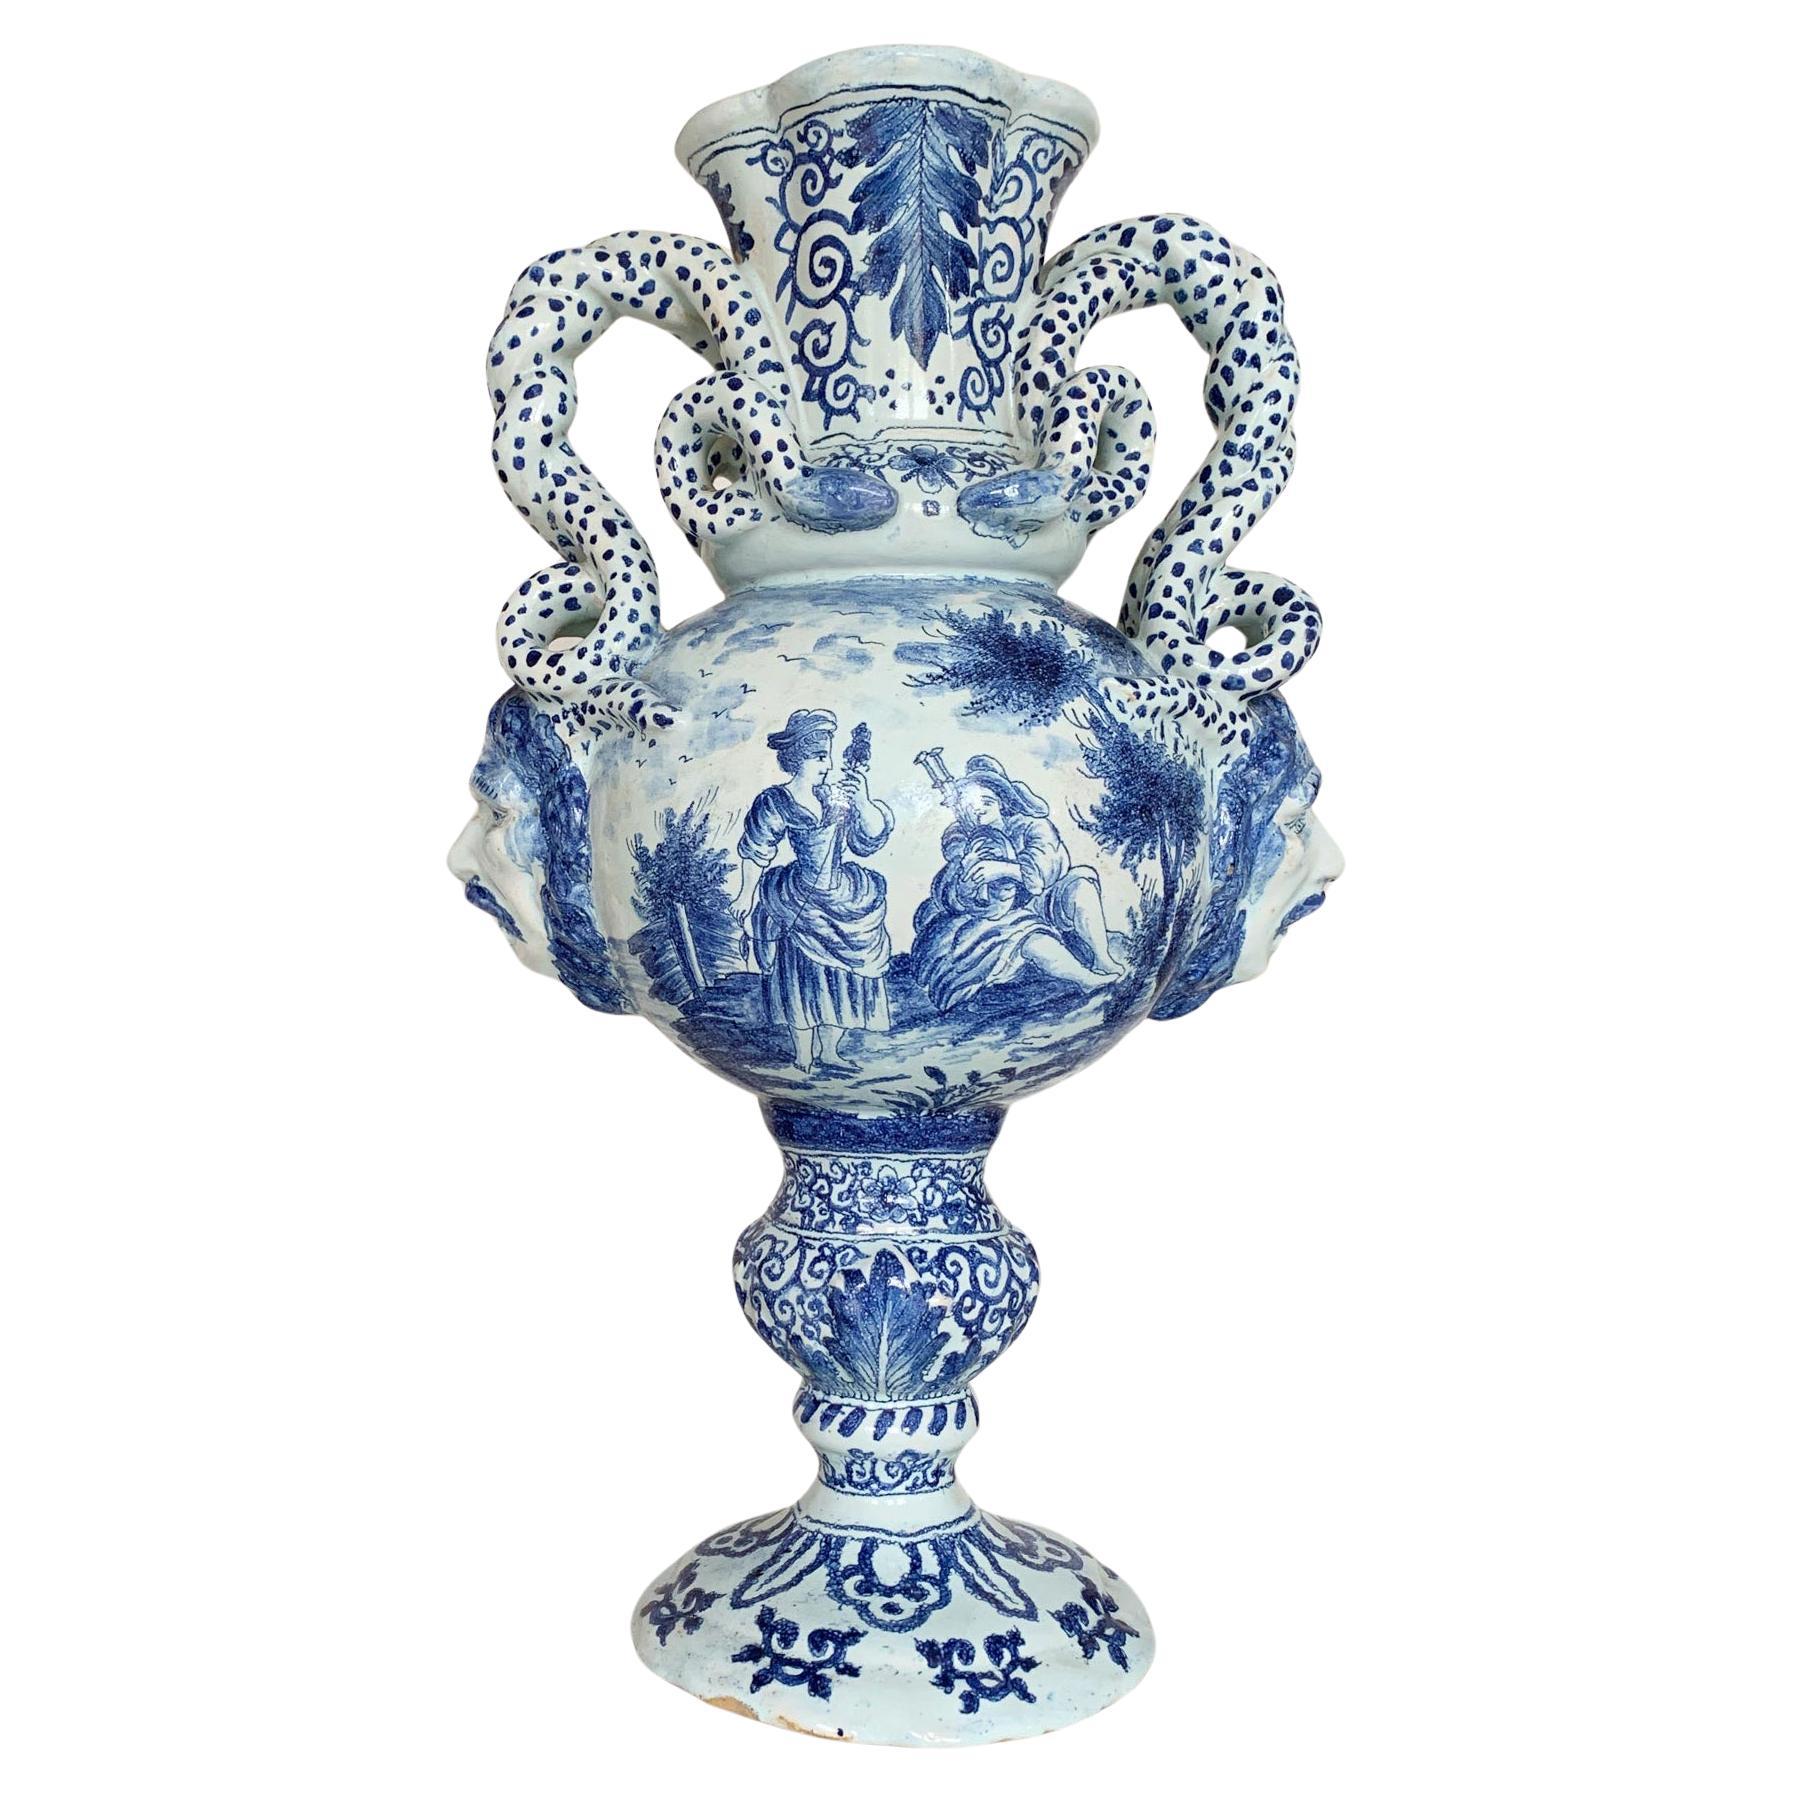  Late 18th C Delft Style Bacchus Serpent Handled Vase Blue & White